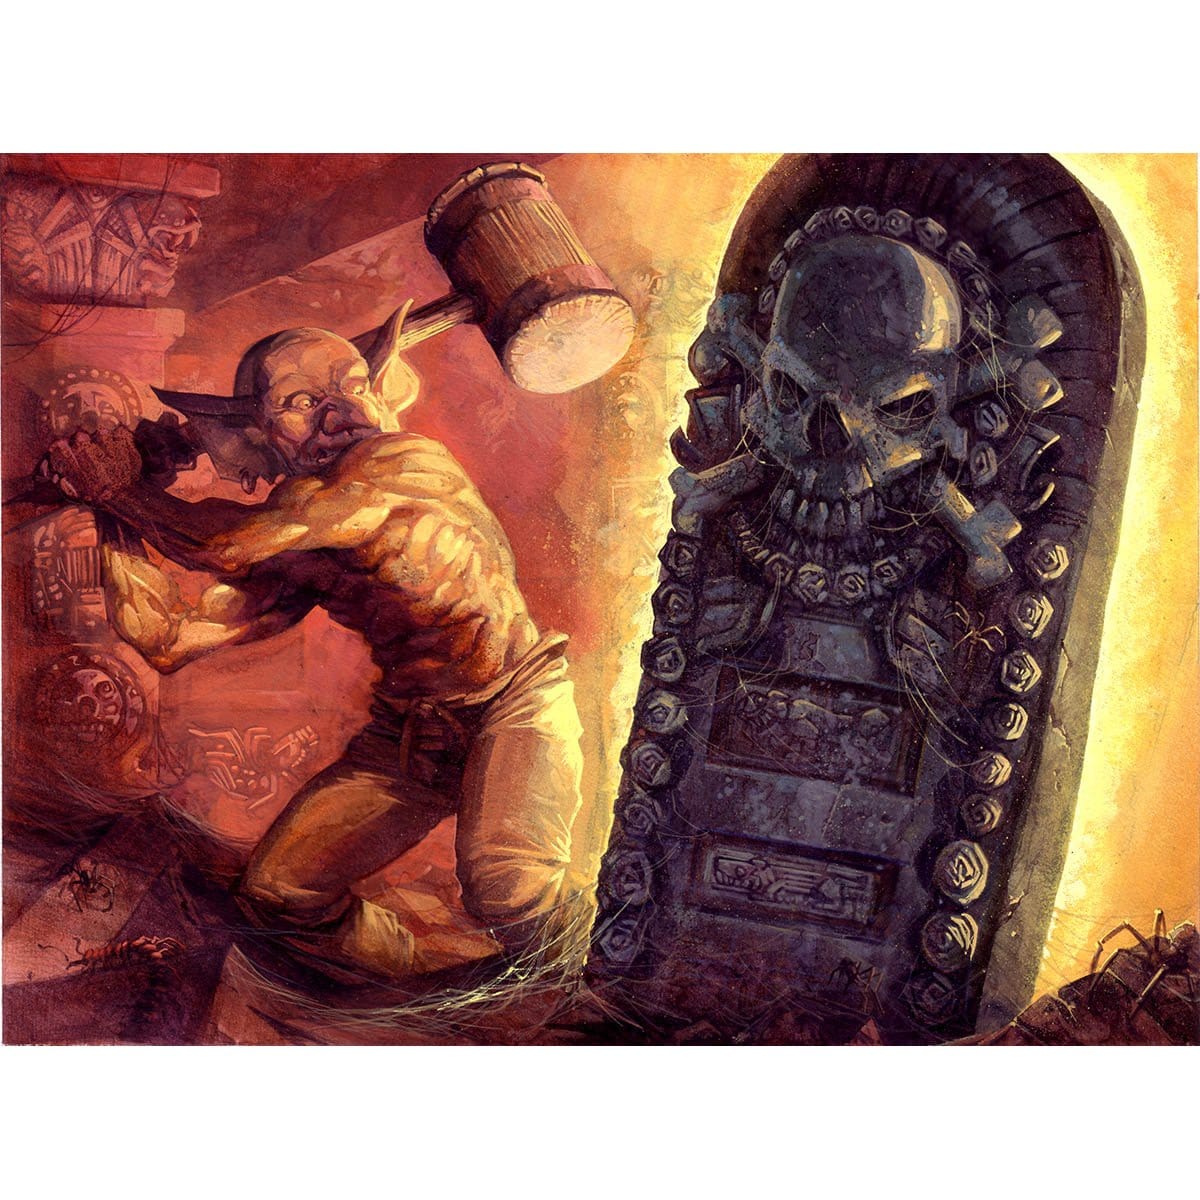 Goblin Token Print - Print - Original Magic Art - Accessories for Magic the Gathering and other card games